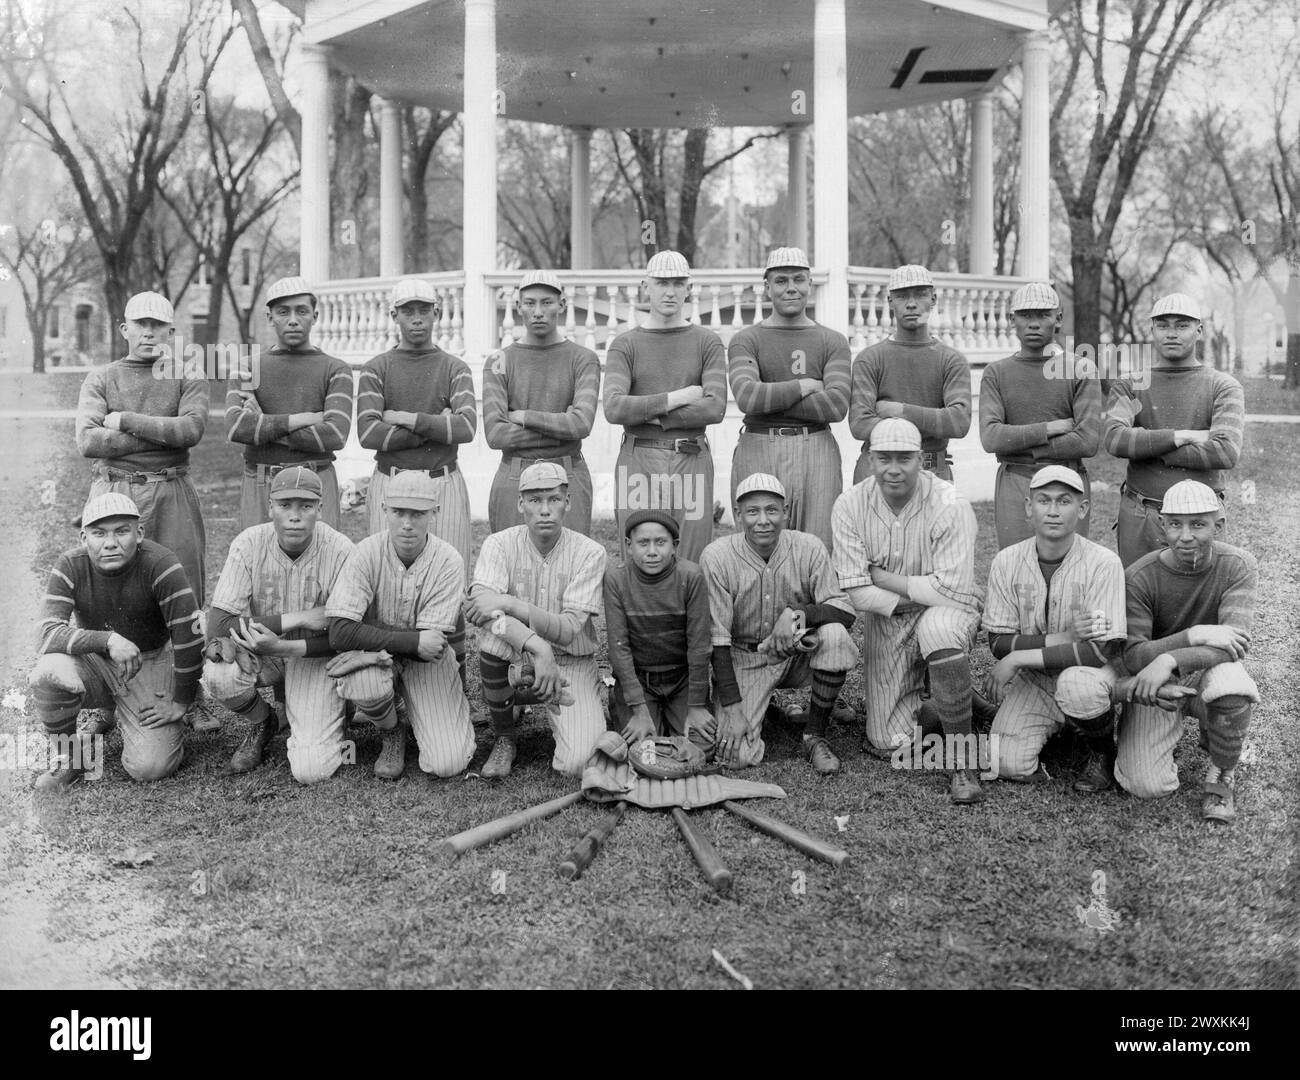 Group photo of a baseball team, possibly Haskell Institute in Kansas (1912-1917) Stock Photo